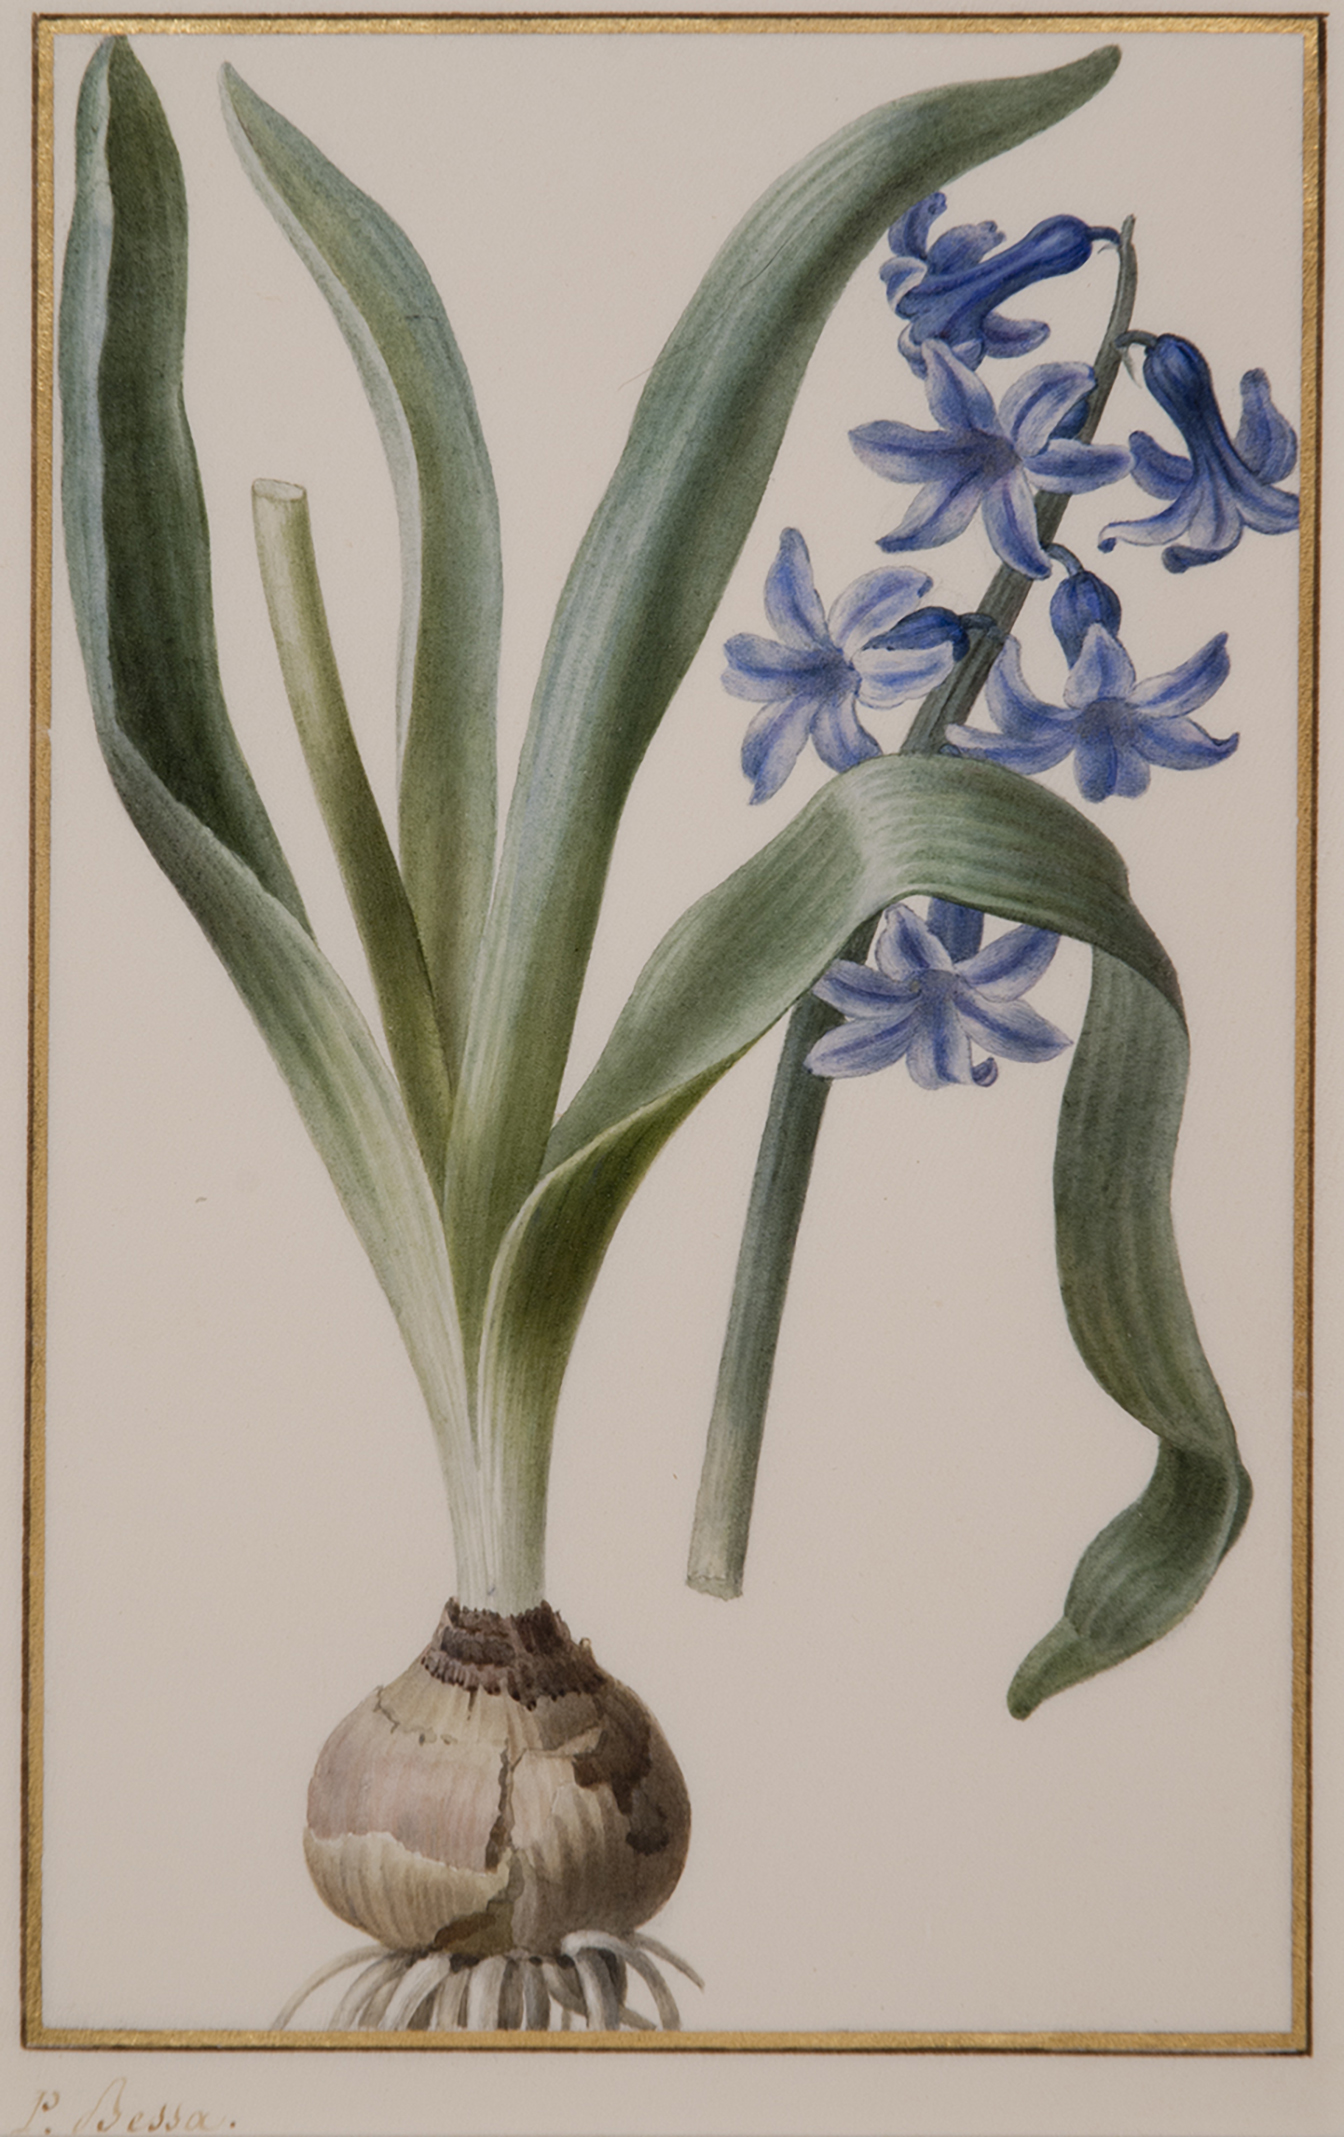 Pancrace Bessa (French, 1772–1846), Hyacinthus Orientalis, 1810–1826, watercolor on white vellum, 7 3/8 x 4 9/16 inches. Presented in memory of James Rea Maxwell Jr., Class of 1921, 74.4